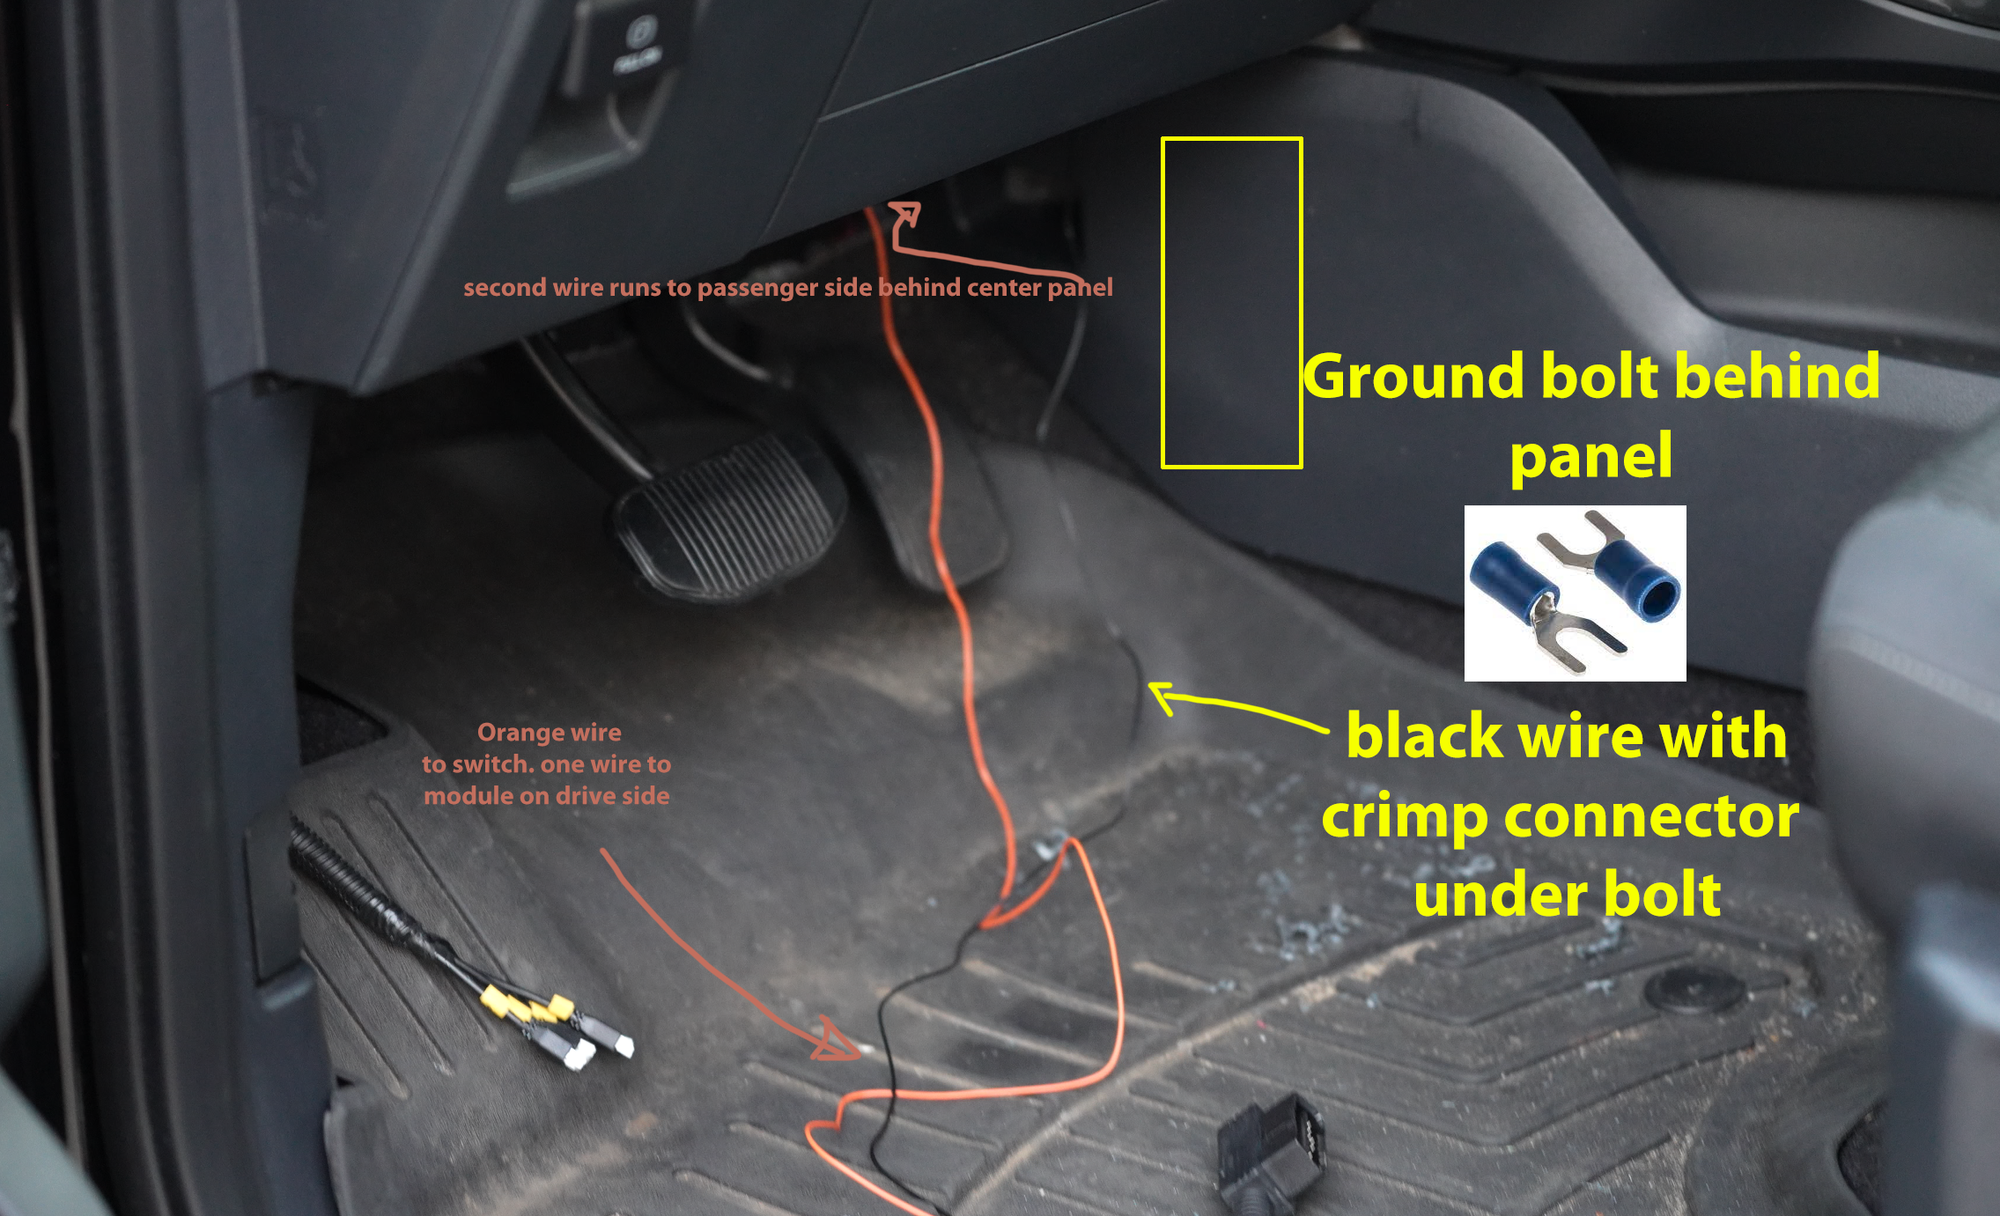 Easily Find Car Accessory Power with SourcePWR® from Rostra